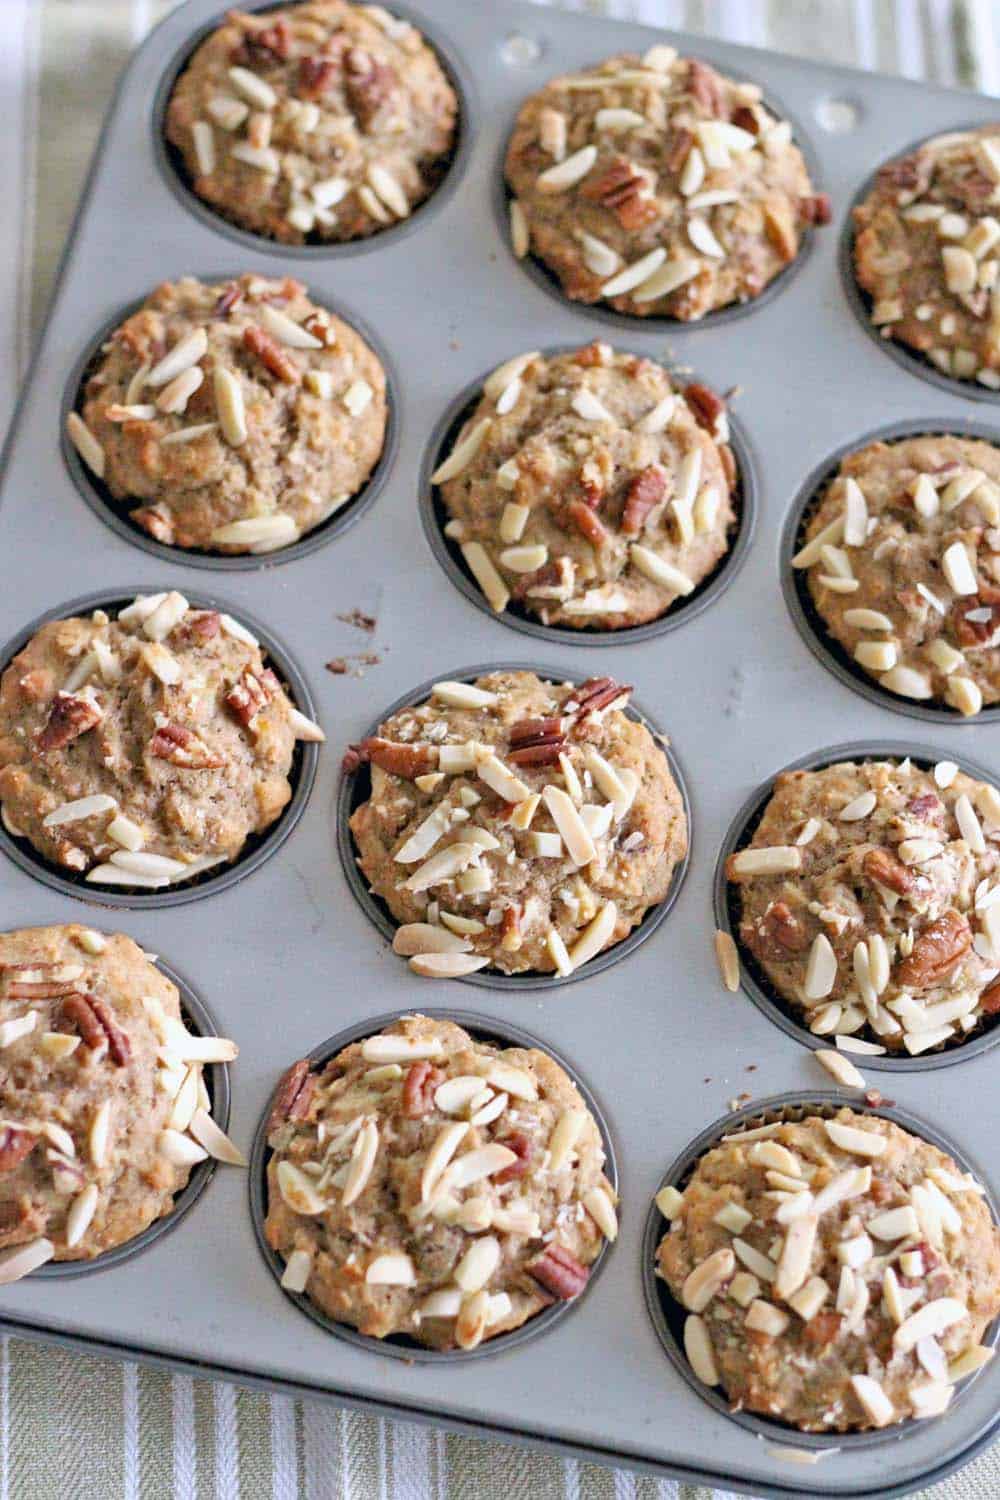 Whole Wheat Banana Oat and Toasted Nut Muffins | These muffins are 100% whole grain and guilt-free, packed full of nuts for protein and banana for natural sweetness. They are moist, delicious, and can be made in bulk and frozen for easy busy morning breakfasts!